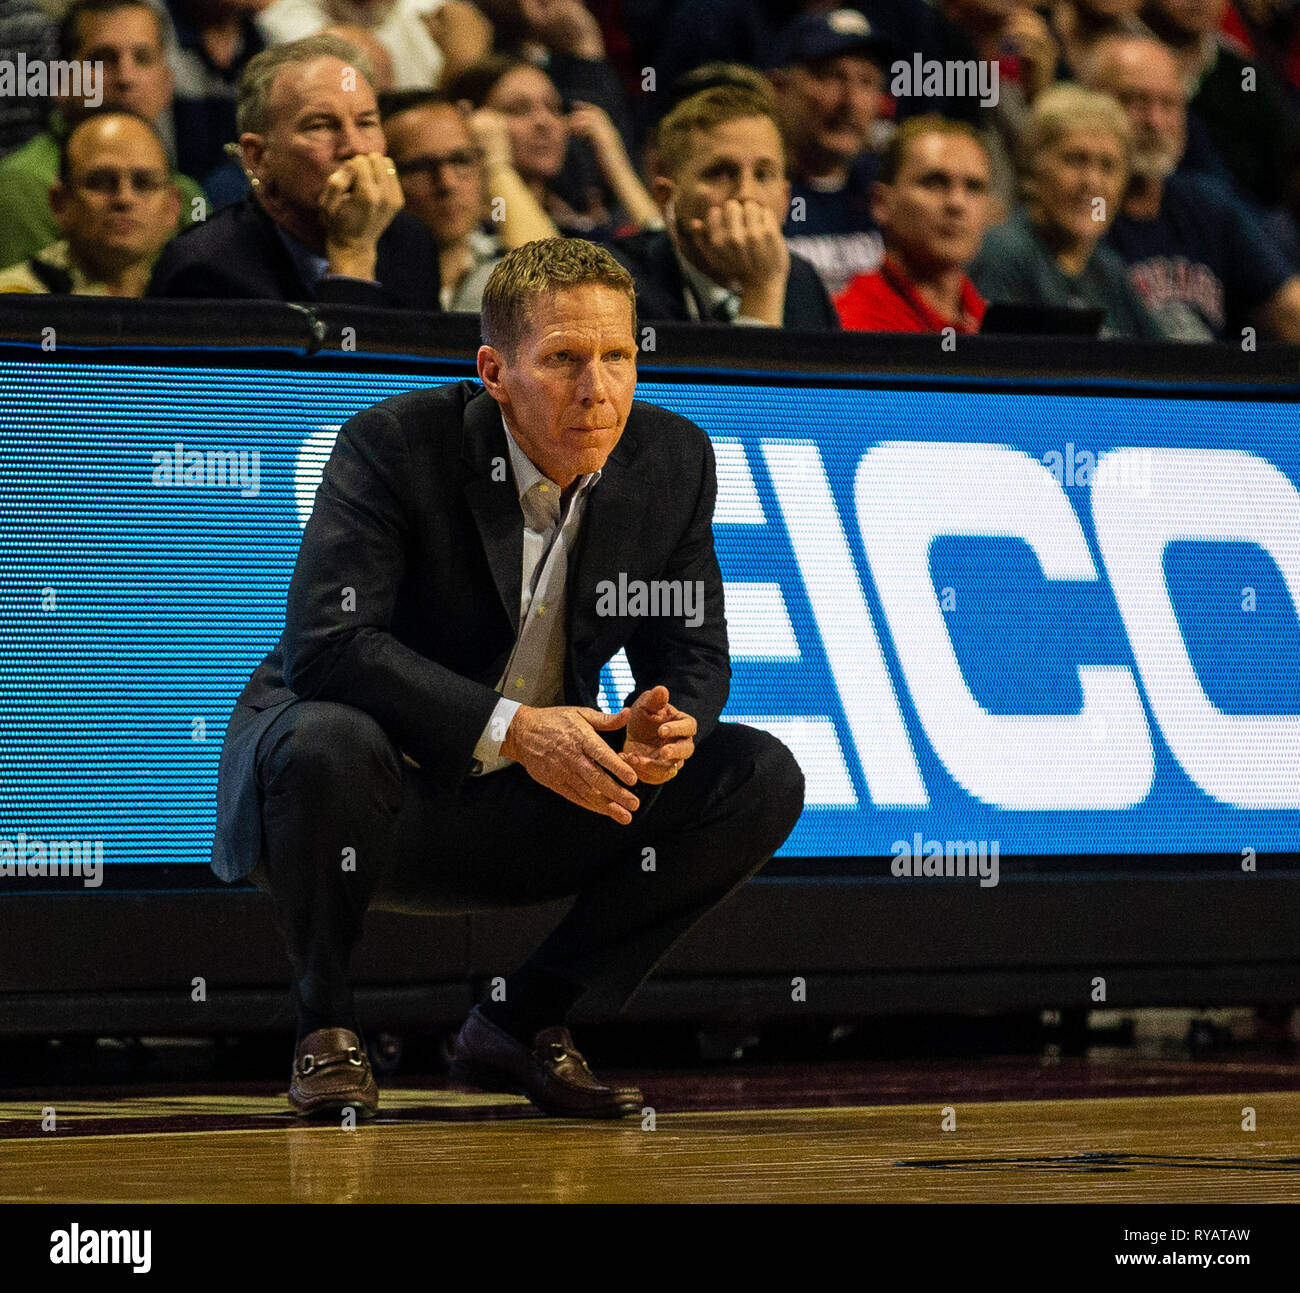 Mar 12 2019 Las Vegas, NV, U.S.A. Gonzaga head coach Mark Few during the NCAA West Coast Conference Men's Basketball Tournament championship between the Gonzaga Bulldogs and the Saint Mary's Gaels 47-60 lost at Orleans Arena Las Vegas, NV. Thurman James/CSM Stock Photo